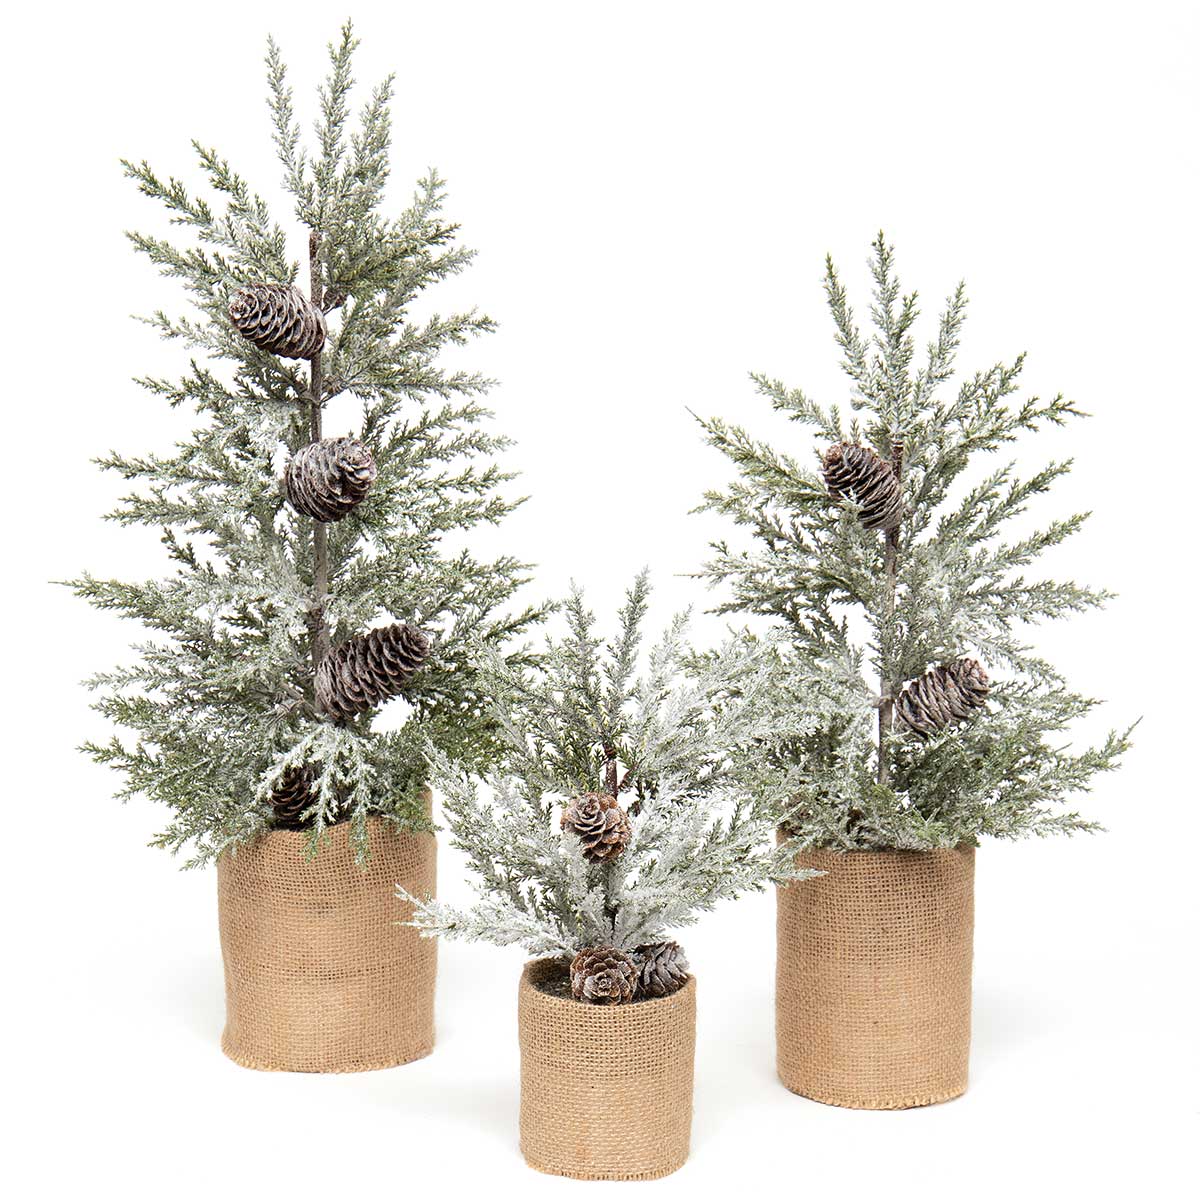 TREE EVERGREEN PINE WITH SNOW MED 7IN X 15IN